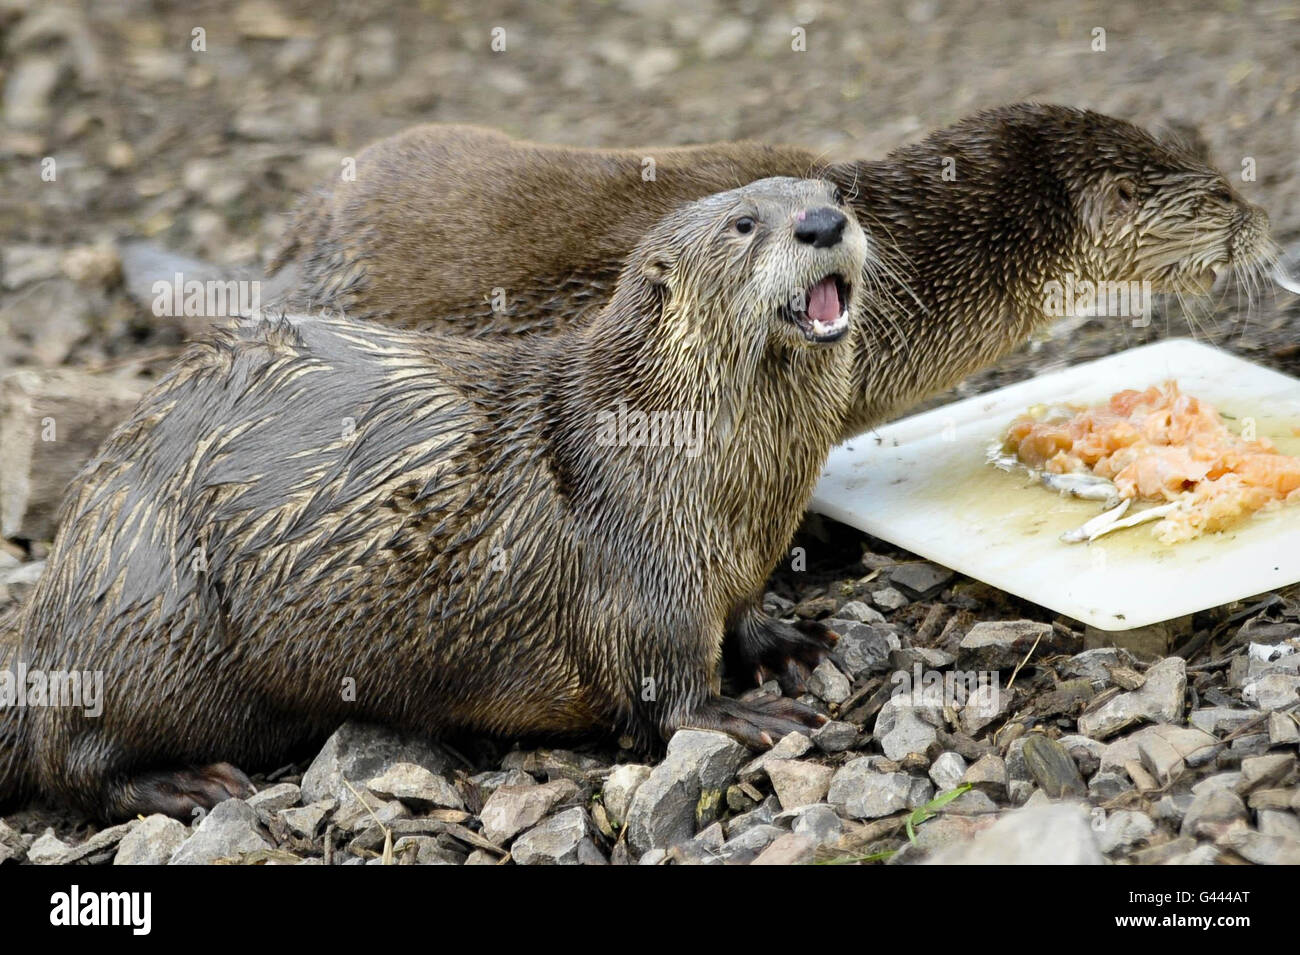 Two-year-old Minnie the otter (front) gulps down a birthday treat of salmon pie and fish blancmange wih her mum, Flo, as she celebrates her second birthday at WWT Slimbridge Wetland Centre, Gloucestershire. Stock Photo